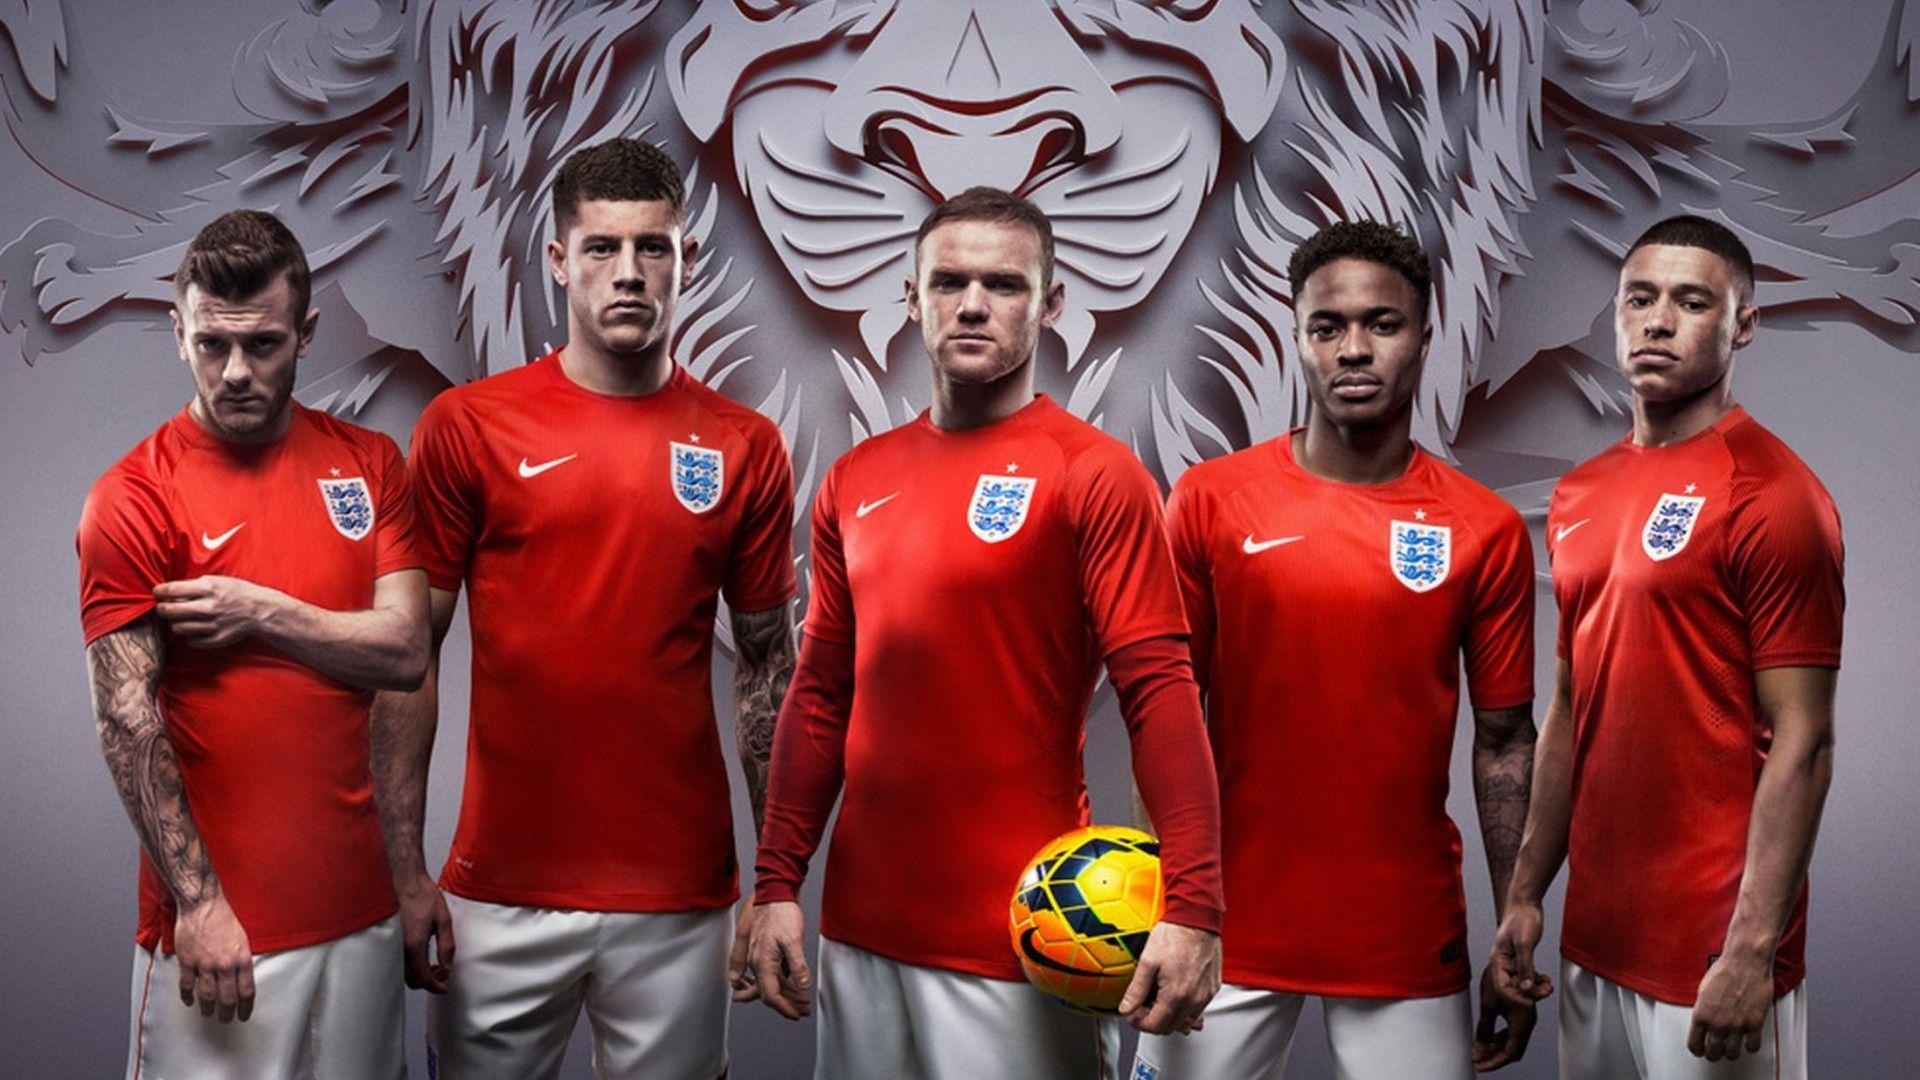 England national football team Wallpaper and Background Image